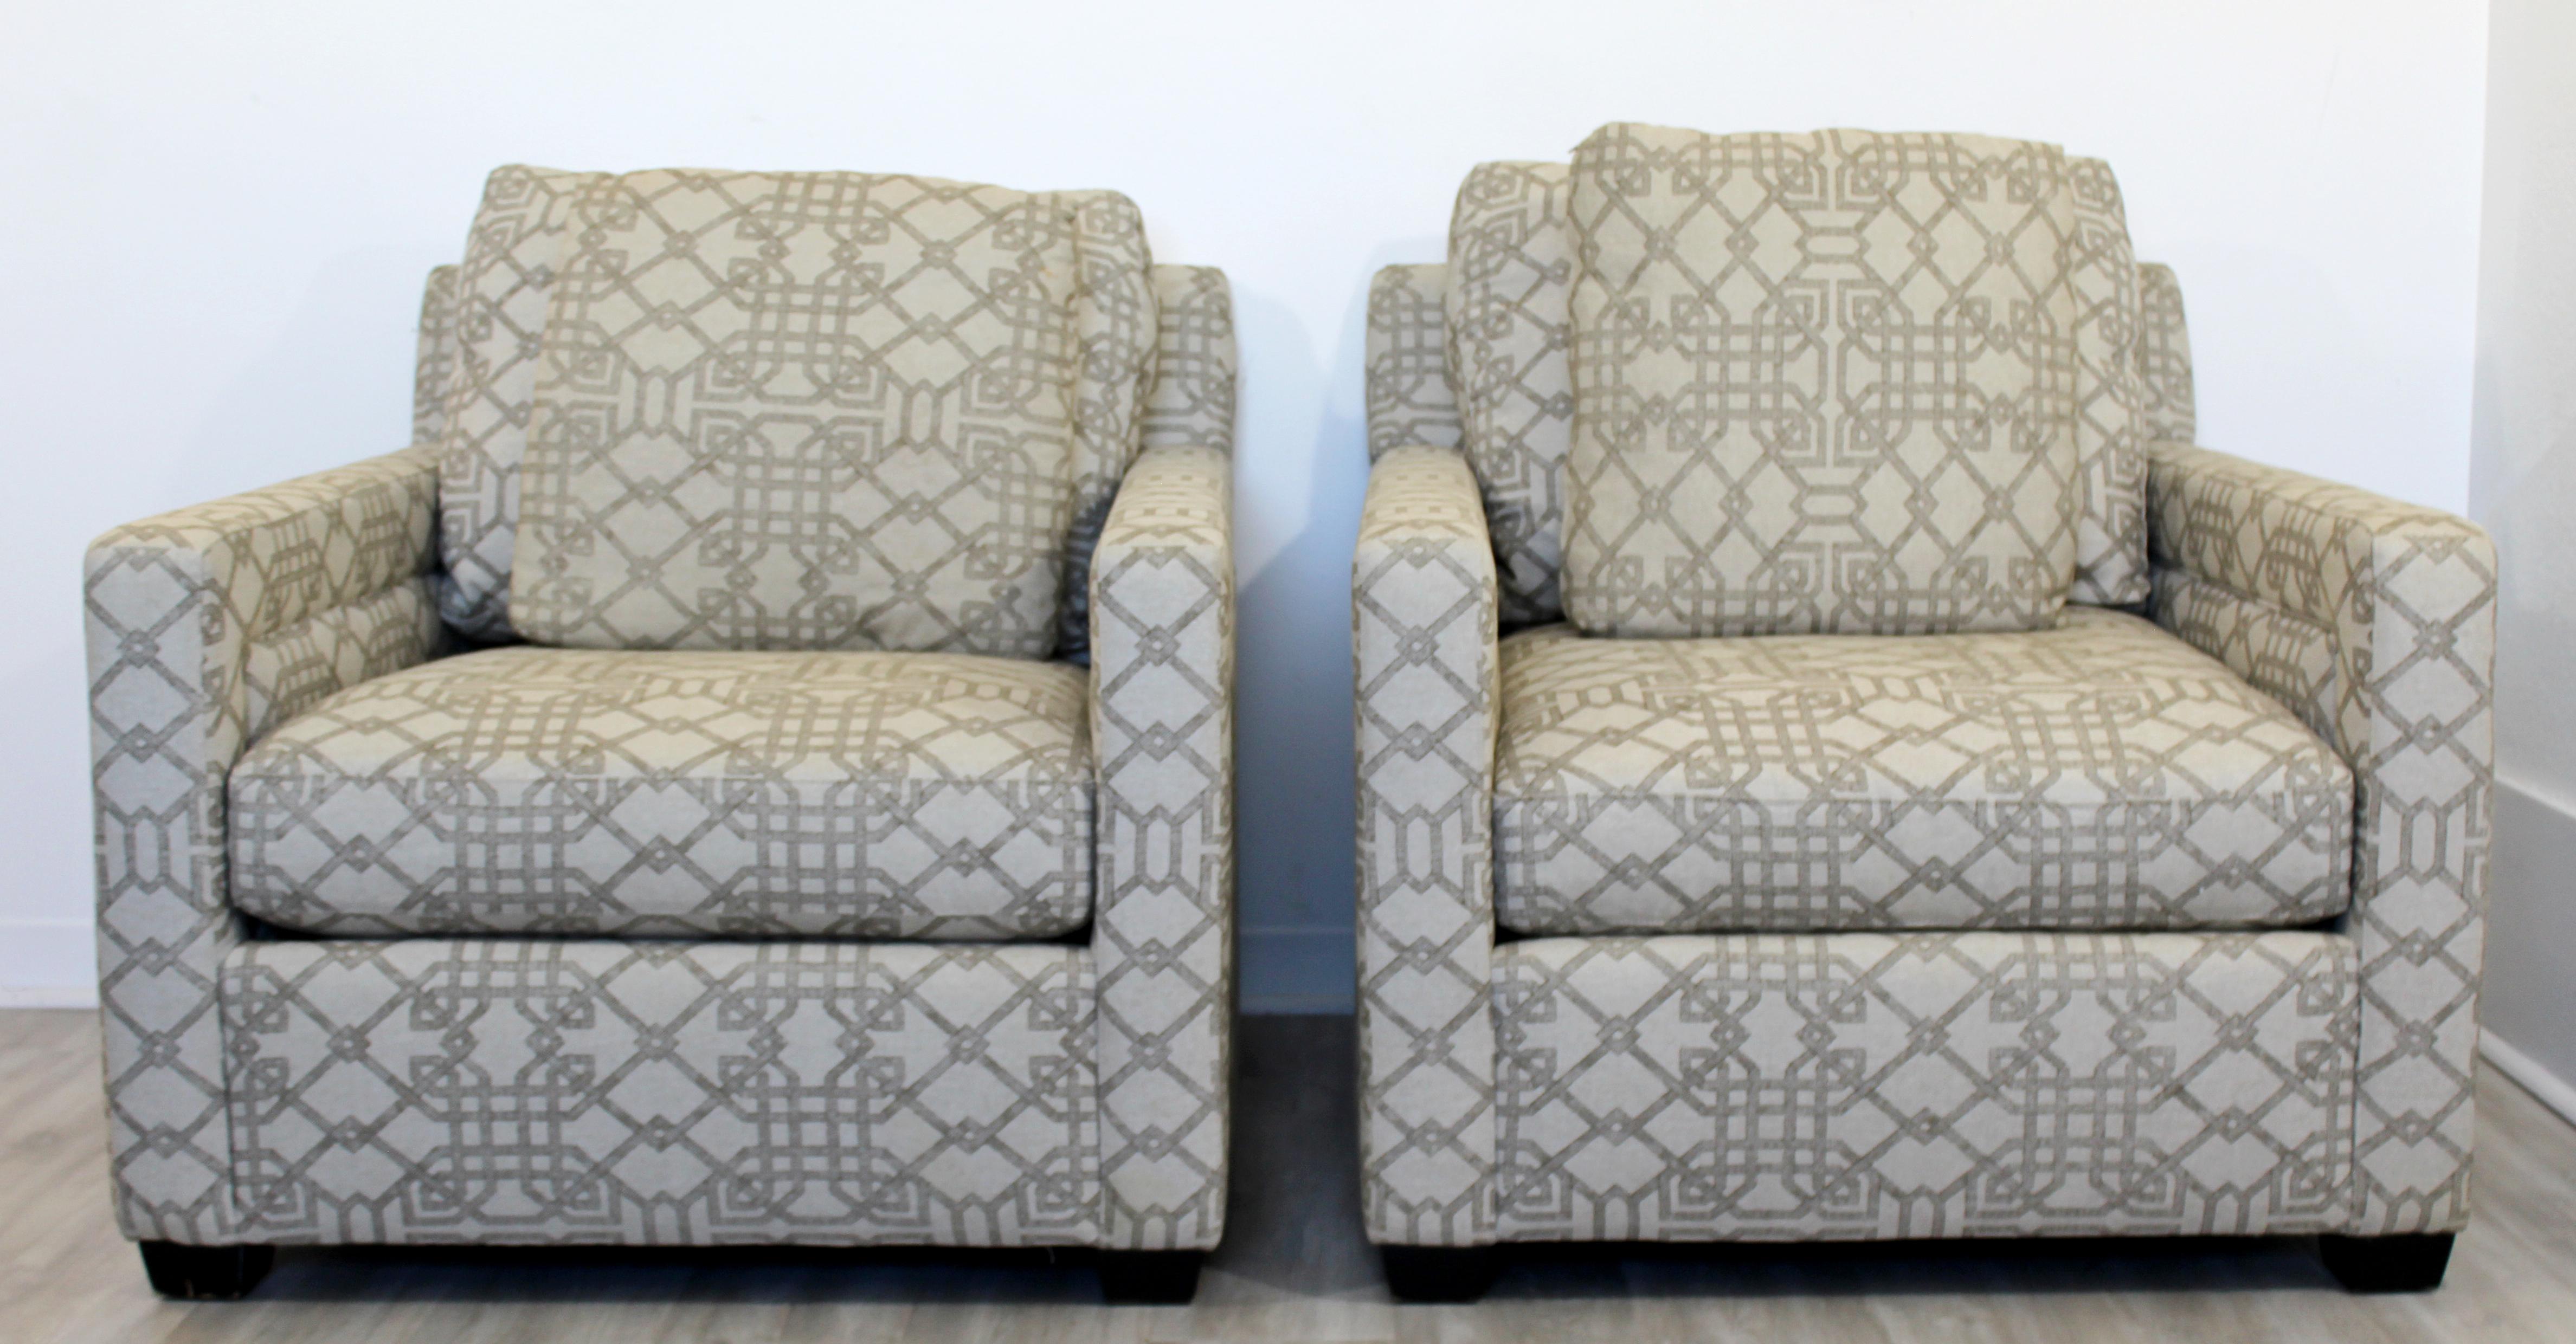 For your consideration is a brilliant pair of lounge armchairs, with a stunning patterned fabric, made in the U.S. by Bernhardt, in the style of Milo Baughman, circa the 1990s. In excellent condition. The dimensions are 33